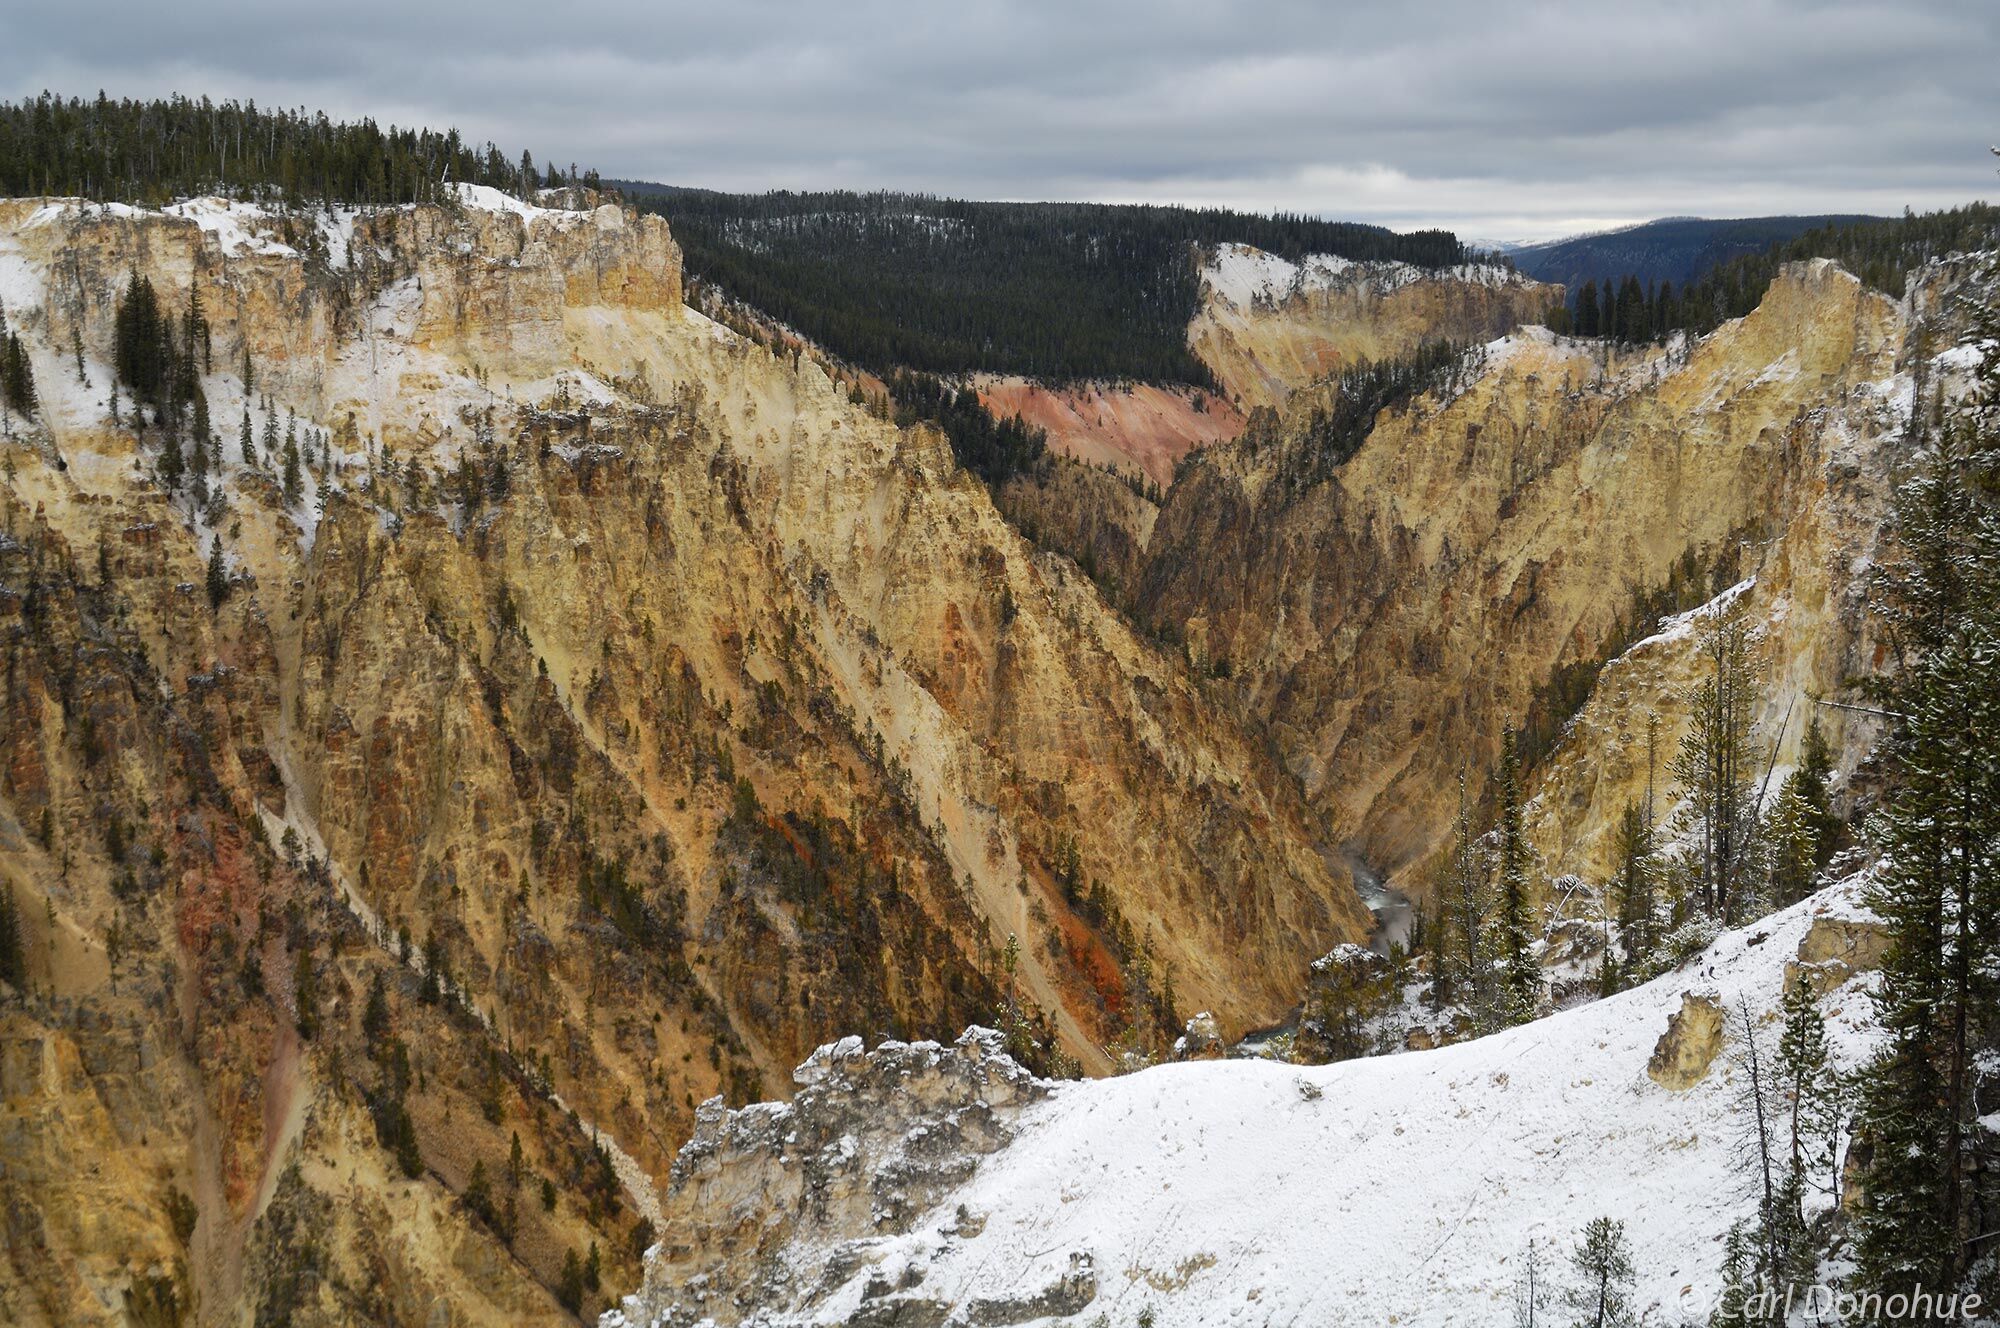 Scenic view down the Canyon below the Lower Falls in Wyoming's Yellowstone National Park, Wyoming.